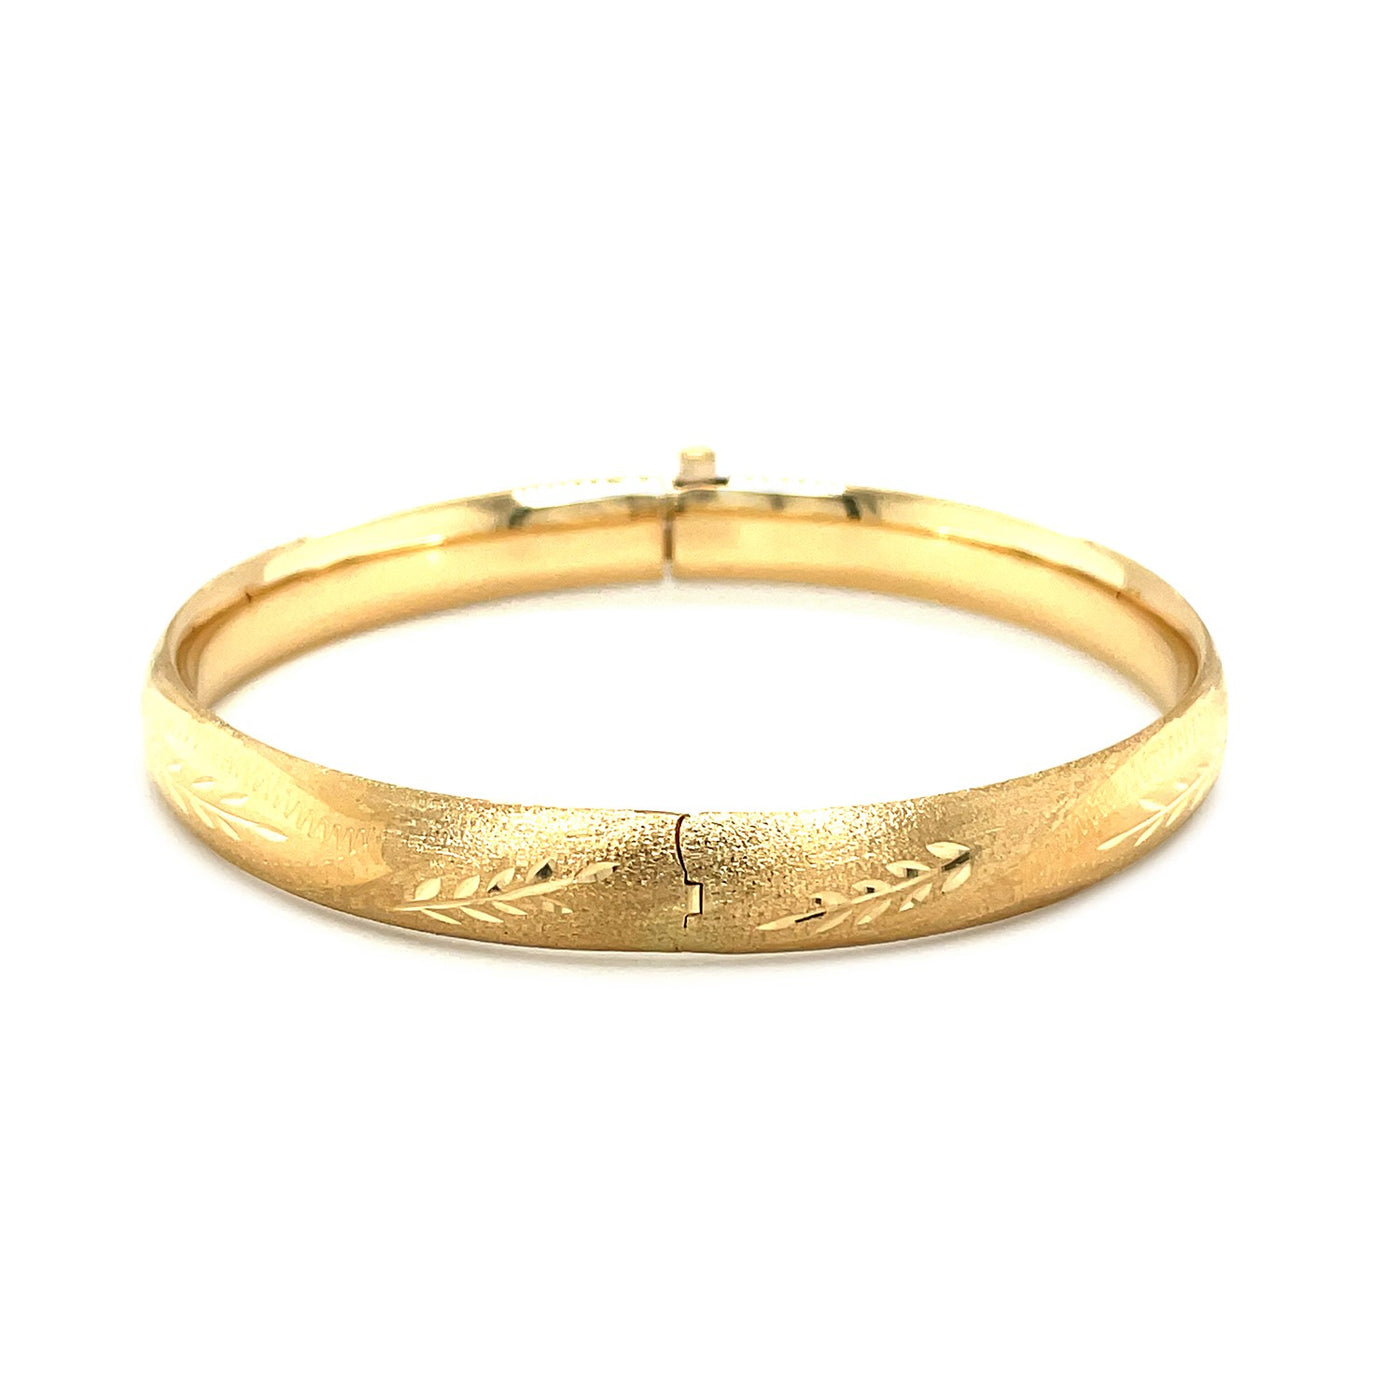 The Classic Floral Cut Bangle 8mm